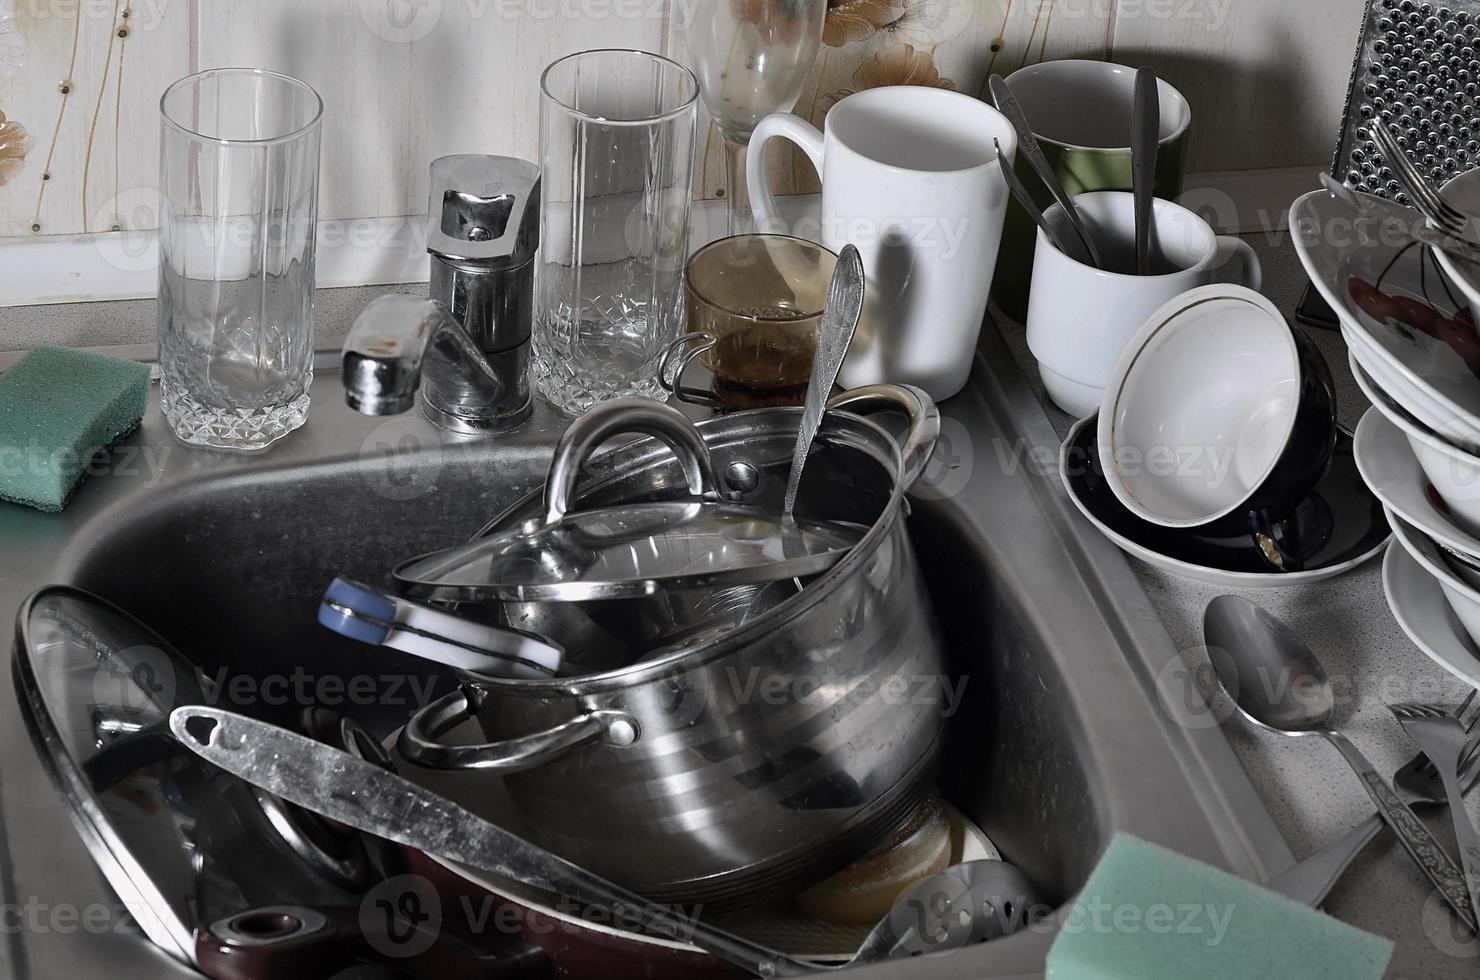 A huge pile of unwashed dishes in the kitchen sink and on the countertop photo